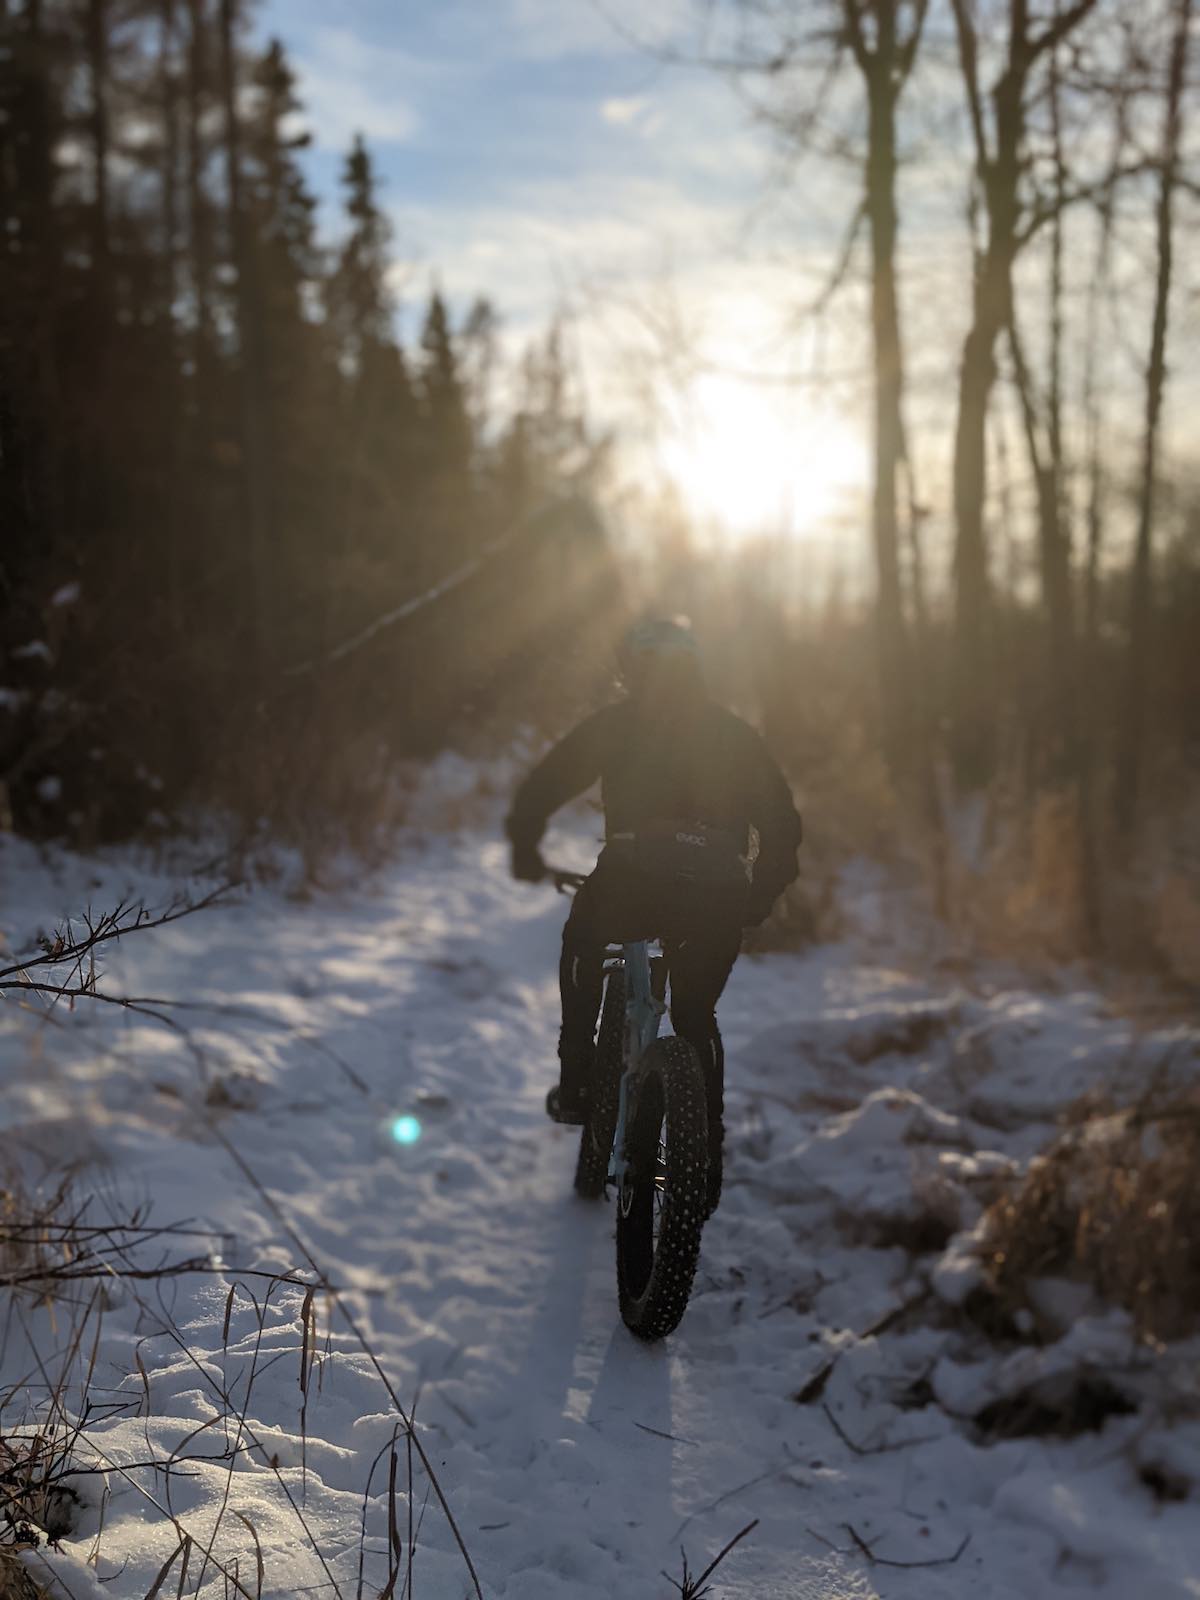 bikerumor pic of the day lois hole centennial provincial park edmonton alberta canada a rider on a fat bike rides into the sun on a snowy trail.